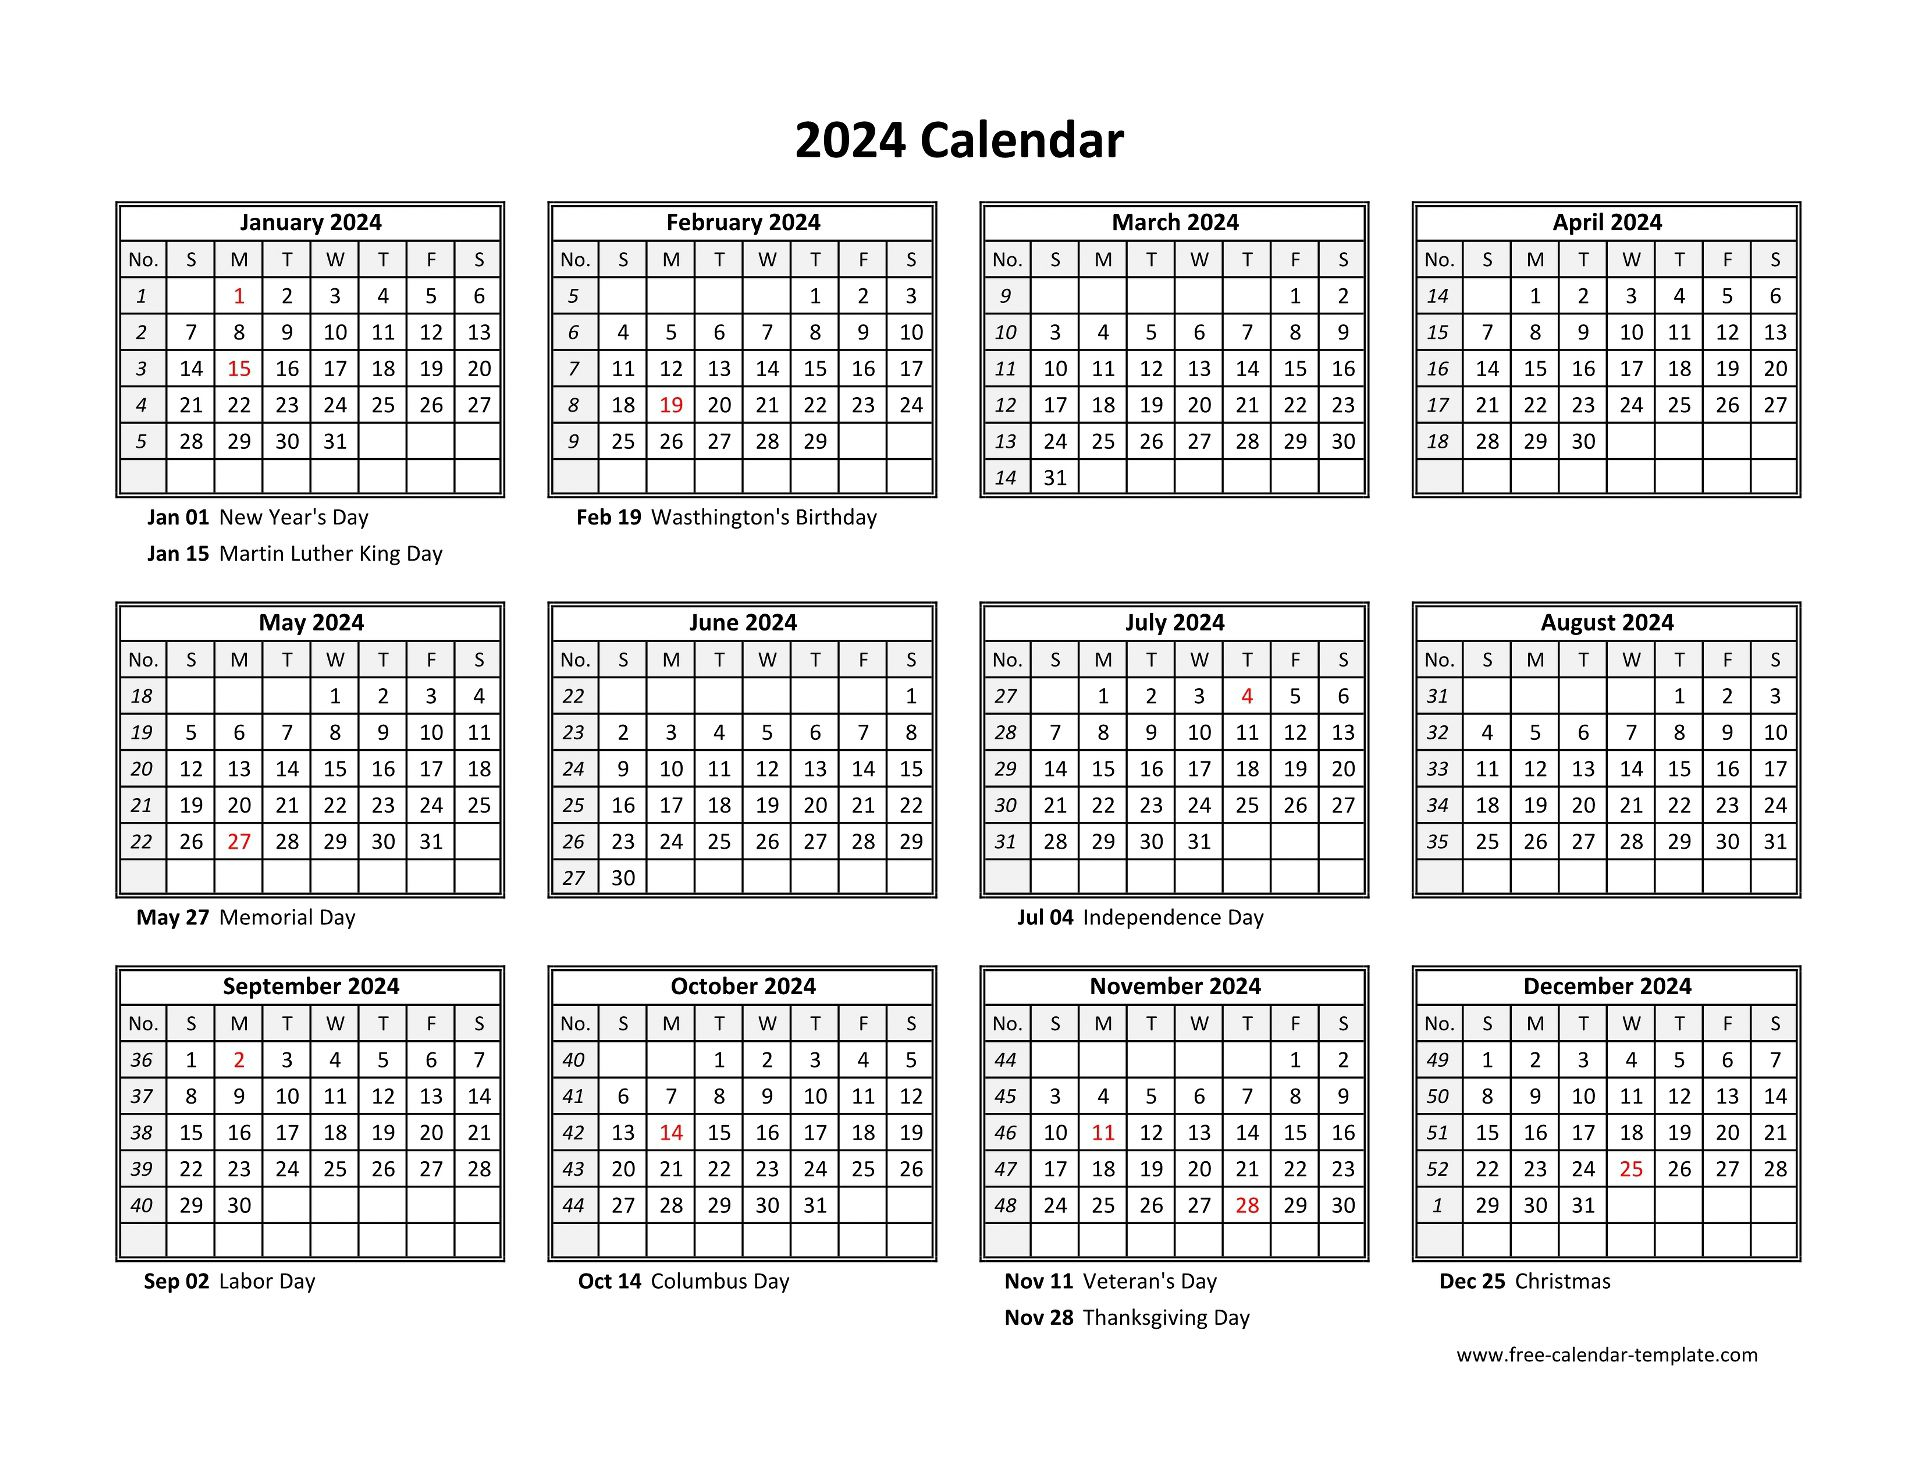 Yearly Calendar 2024 Printable With Federal Holidays | Free for Annual Calendar 2024 Printable